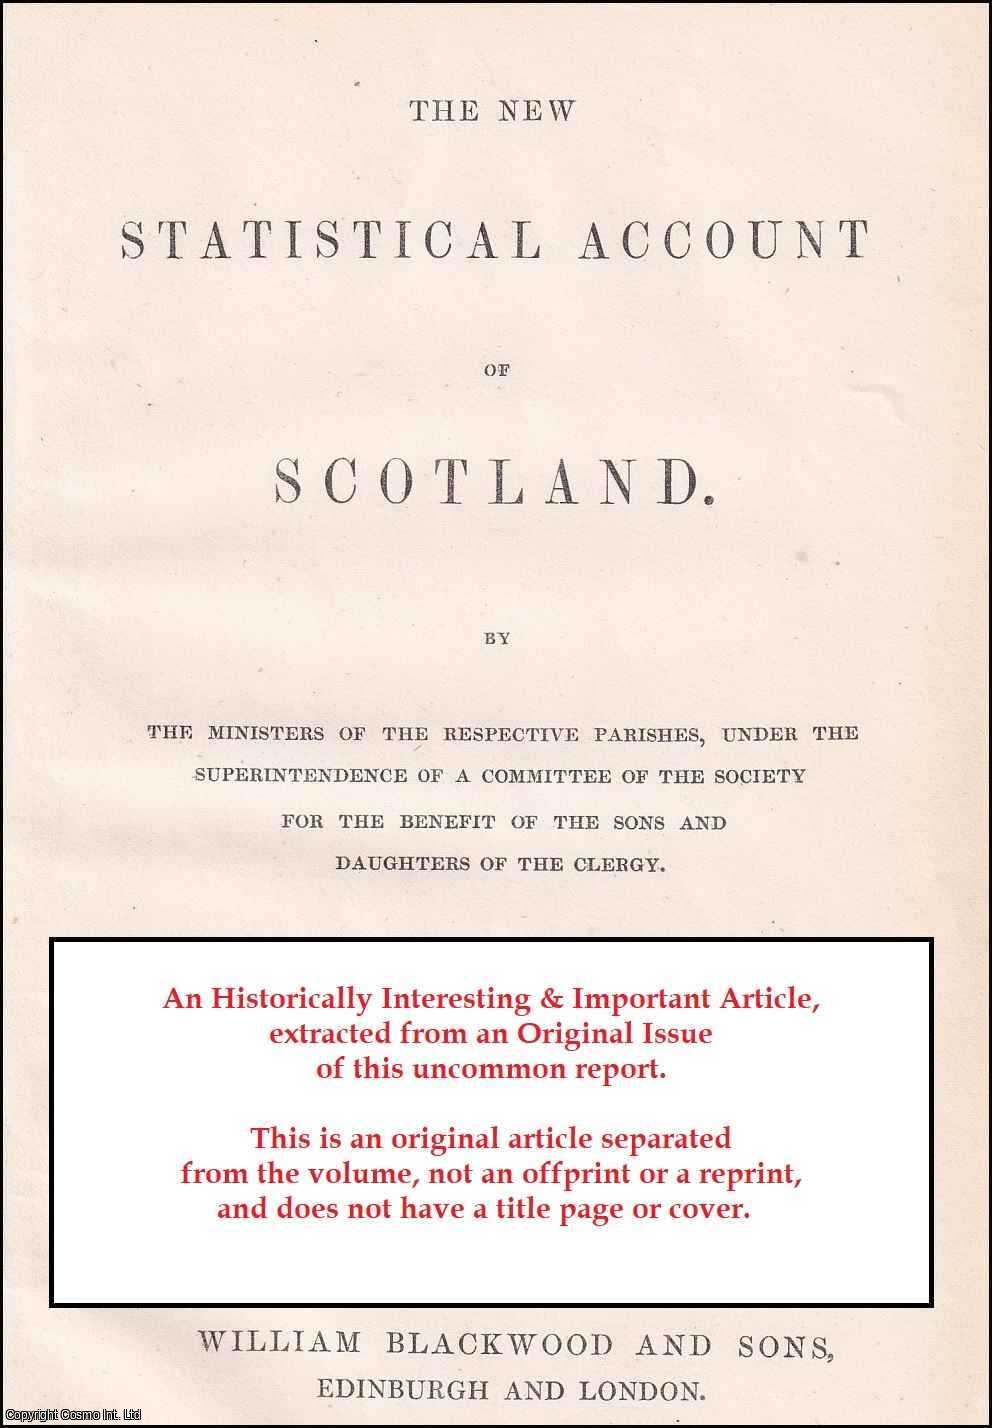 Rev. Thomas Brown - Parish of Kinneff. Presbytery of Fordoun, Synod of Angus and Mearns. An uncommon original article from The New Statistical Account of Scotland, 1845.